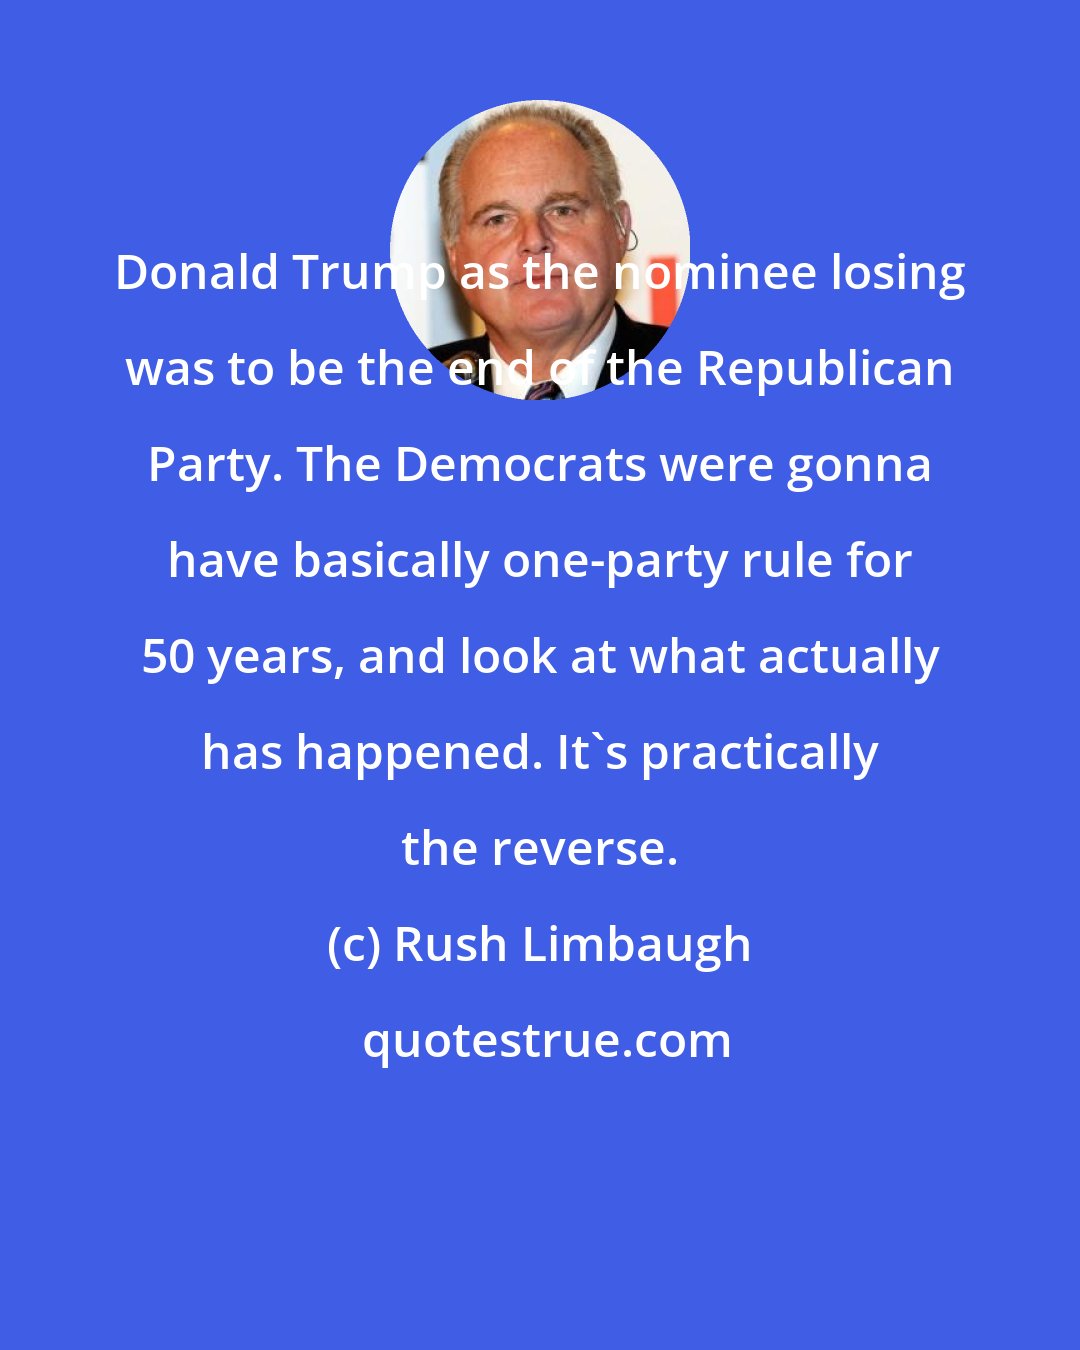 Rush Limbaugh: Donald Trump as the nominee losing was to be the end of the Republican Party. The Democrats were gonna have basically one-party rule for 50 years, and look at what actually has happened. It's practically the reverse.